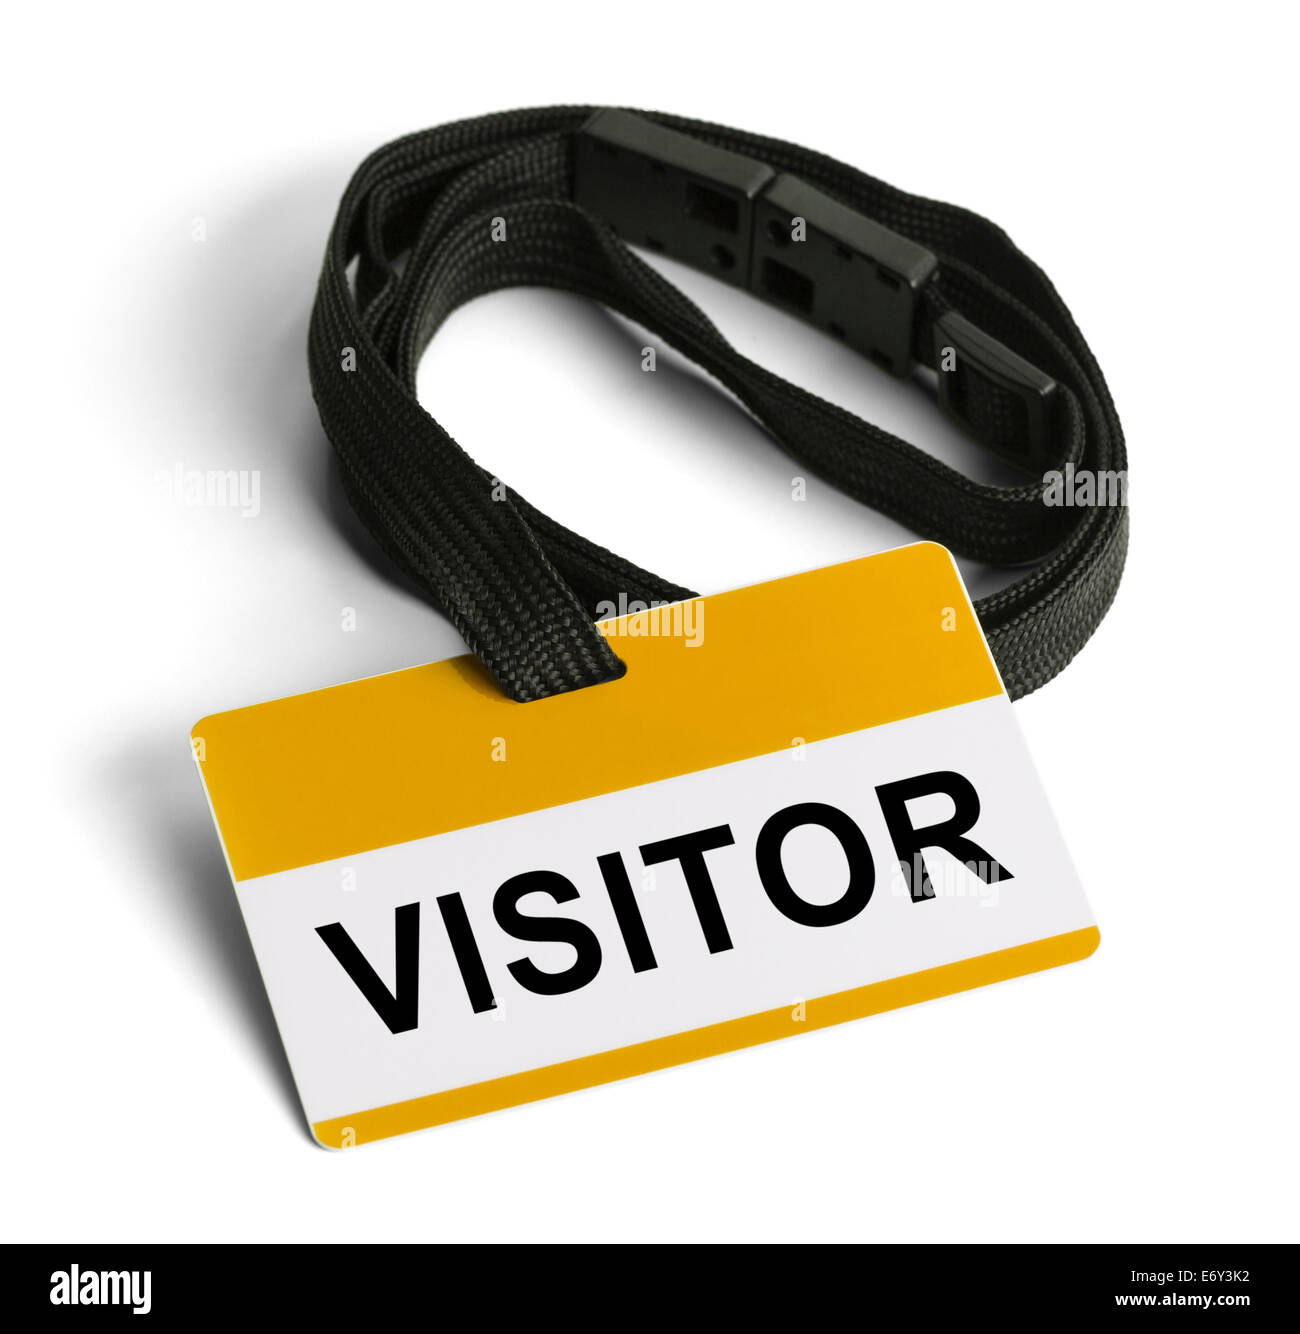 Visitor ID pass. Yellow and White Plastic Card. Isolated on White Background. Stock Photo